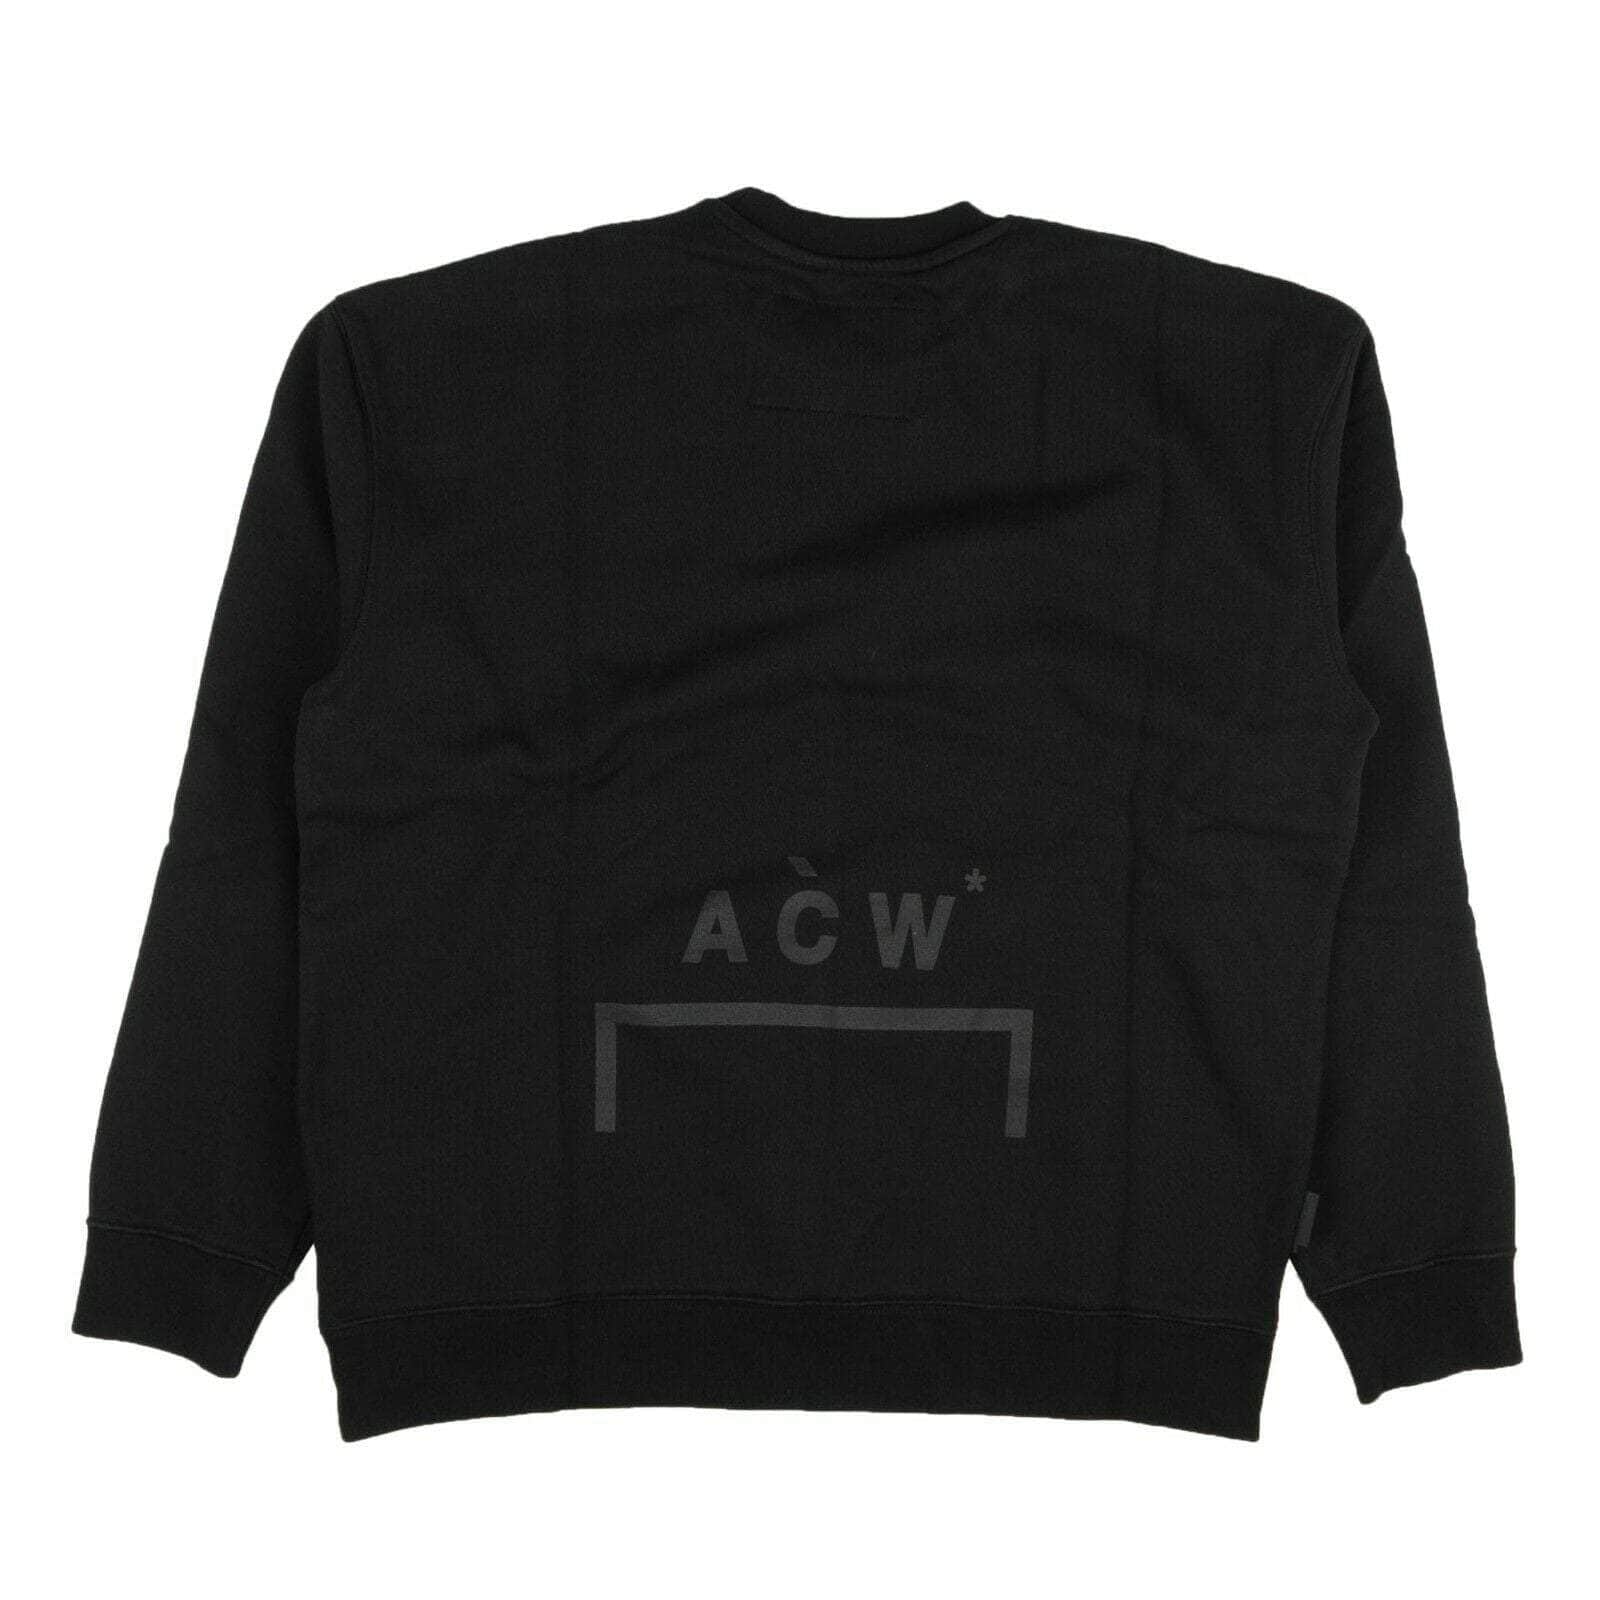 A-COLD-WALL* a-cold-wall, channelenable-all, chicmi, couponcollection, gender-mens, main-clothing, mens-shoes, size-m, size-s, size-xs, under-250 Black Logo Crewneck Sweatshirt